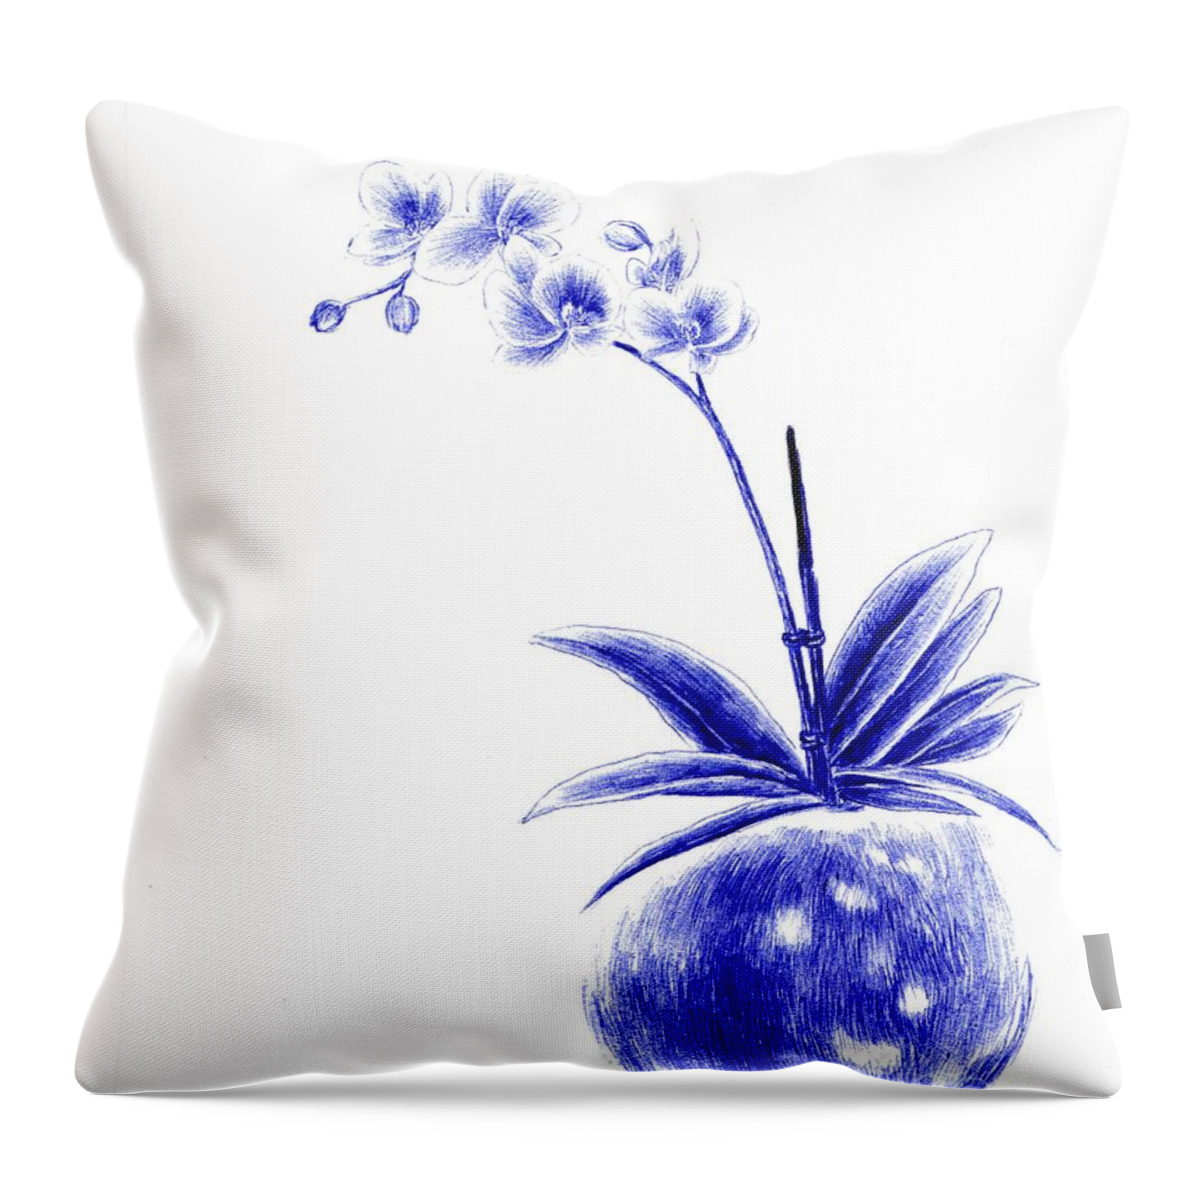 Blue Throw Pillow featuring the drawing Rare Beauty by Alice Chen